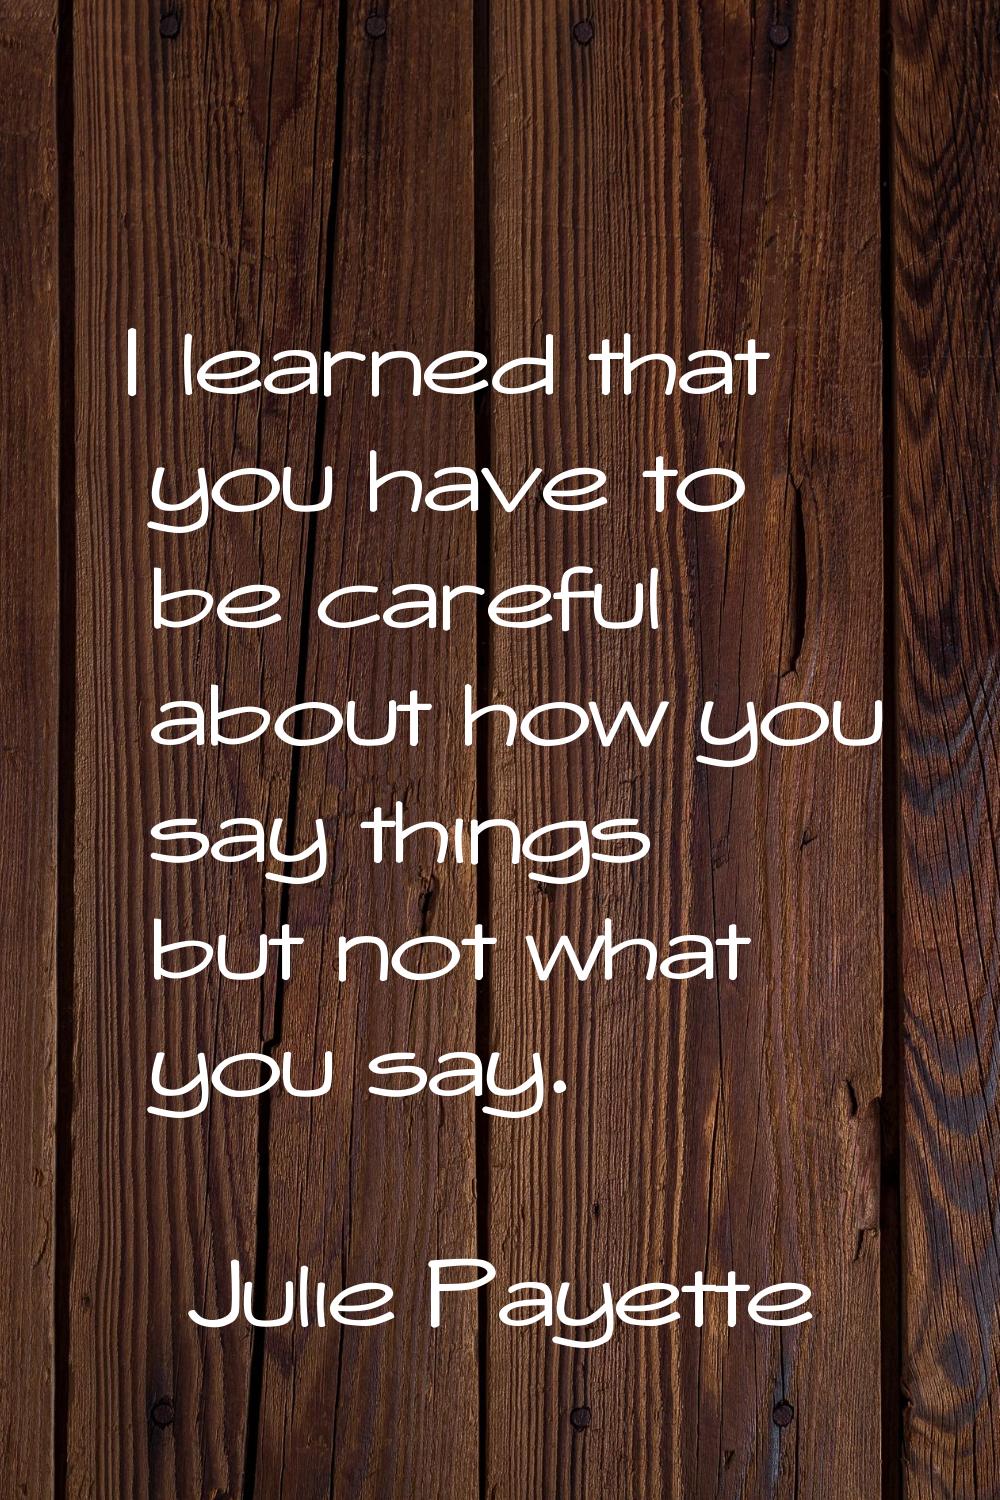 I learned that you have to be careful about how you say things but not what you say.